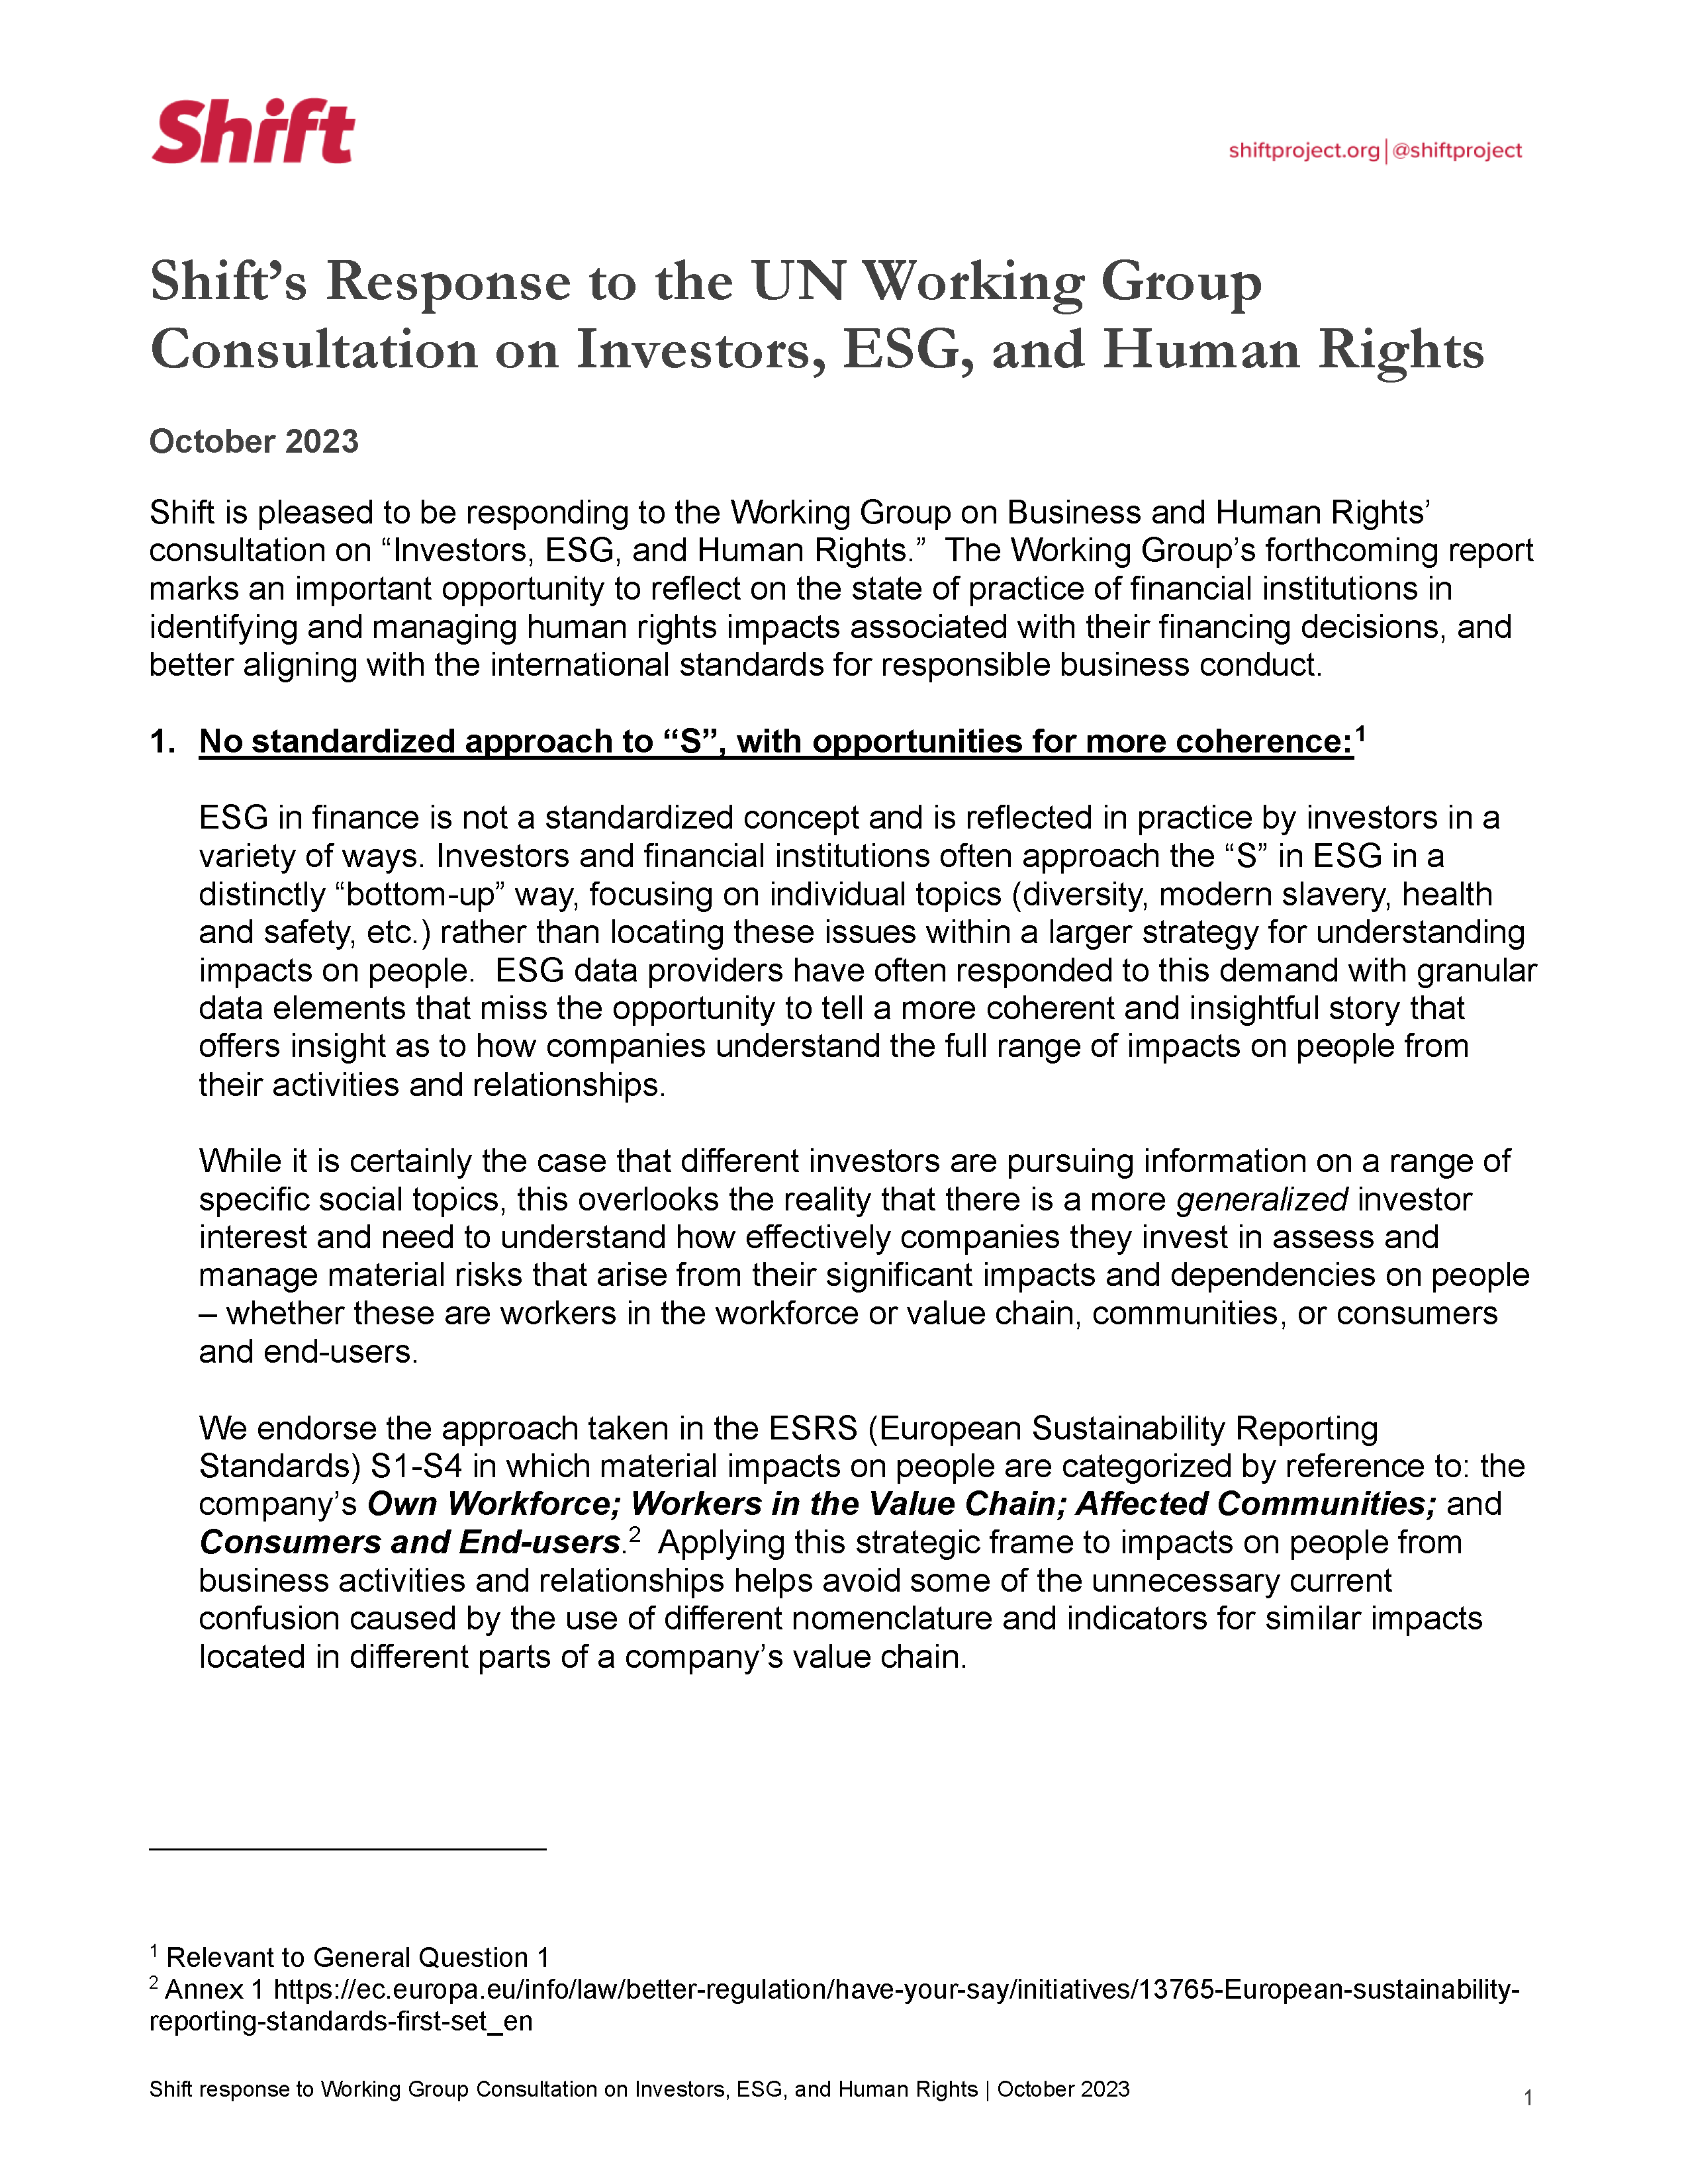 Shift’s Response to the UN Working Group Consultation on Investors, ESG, and Human Rights